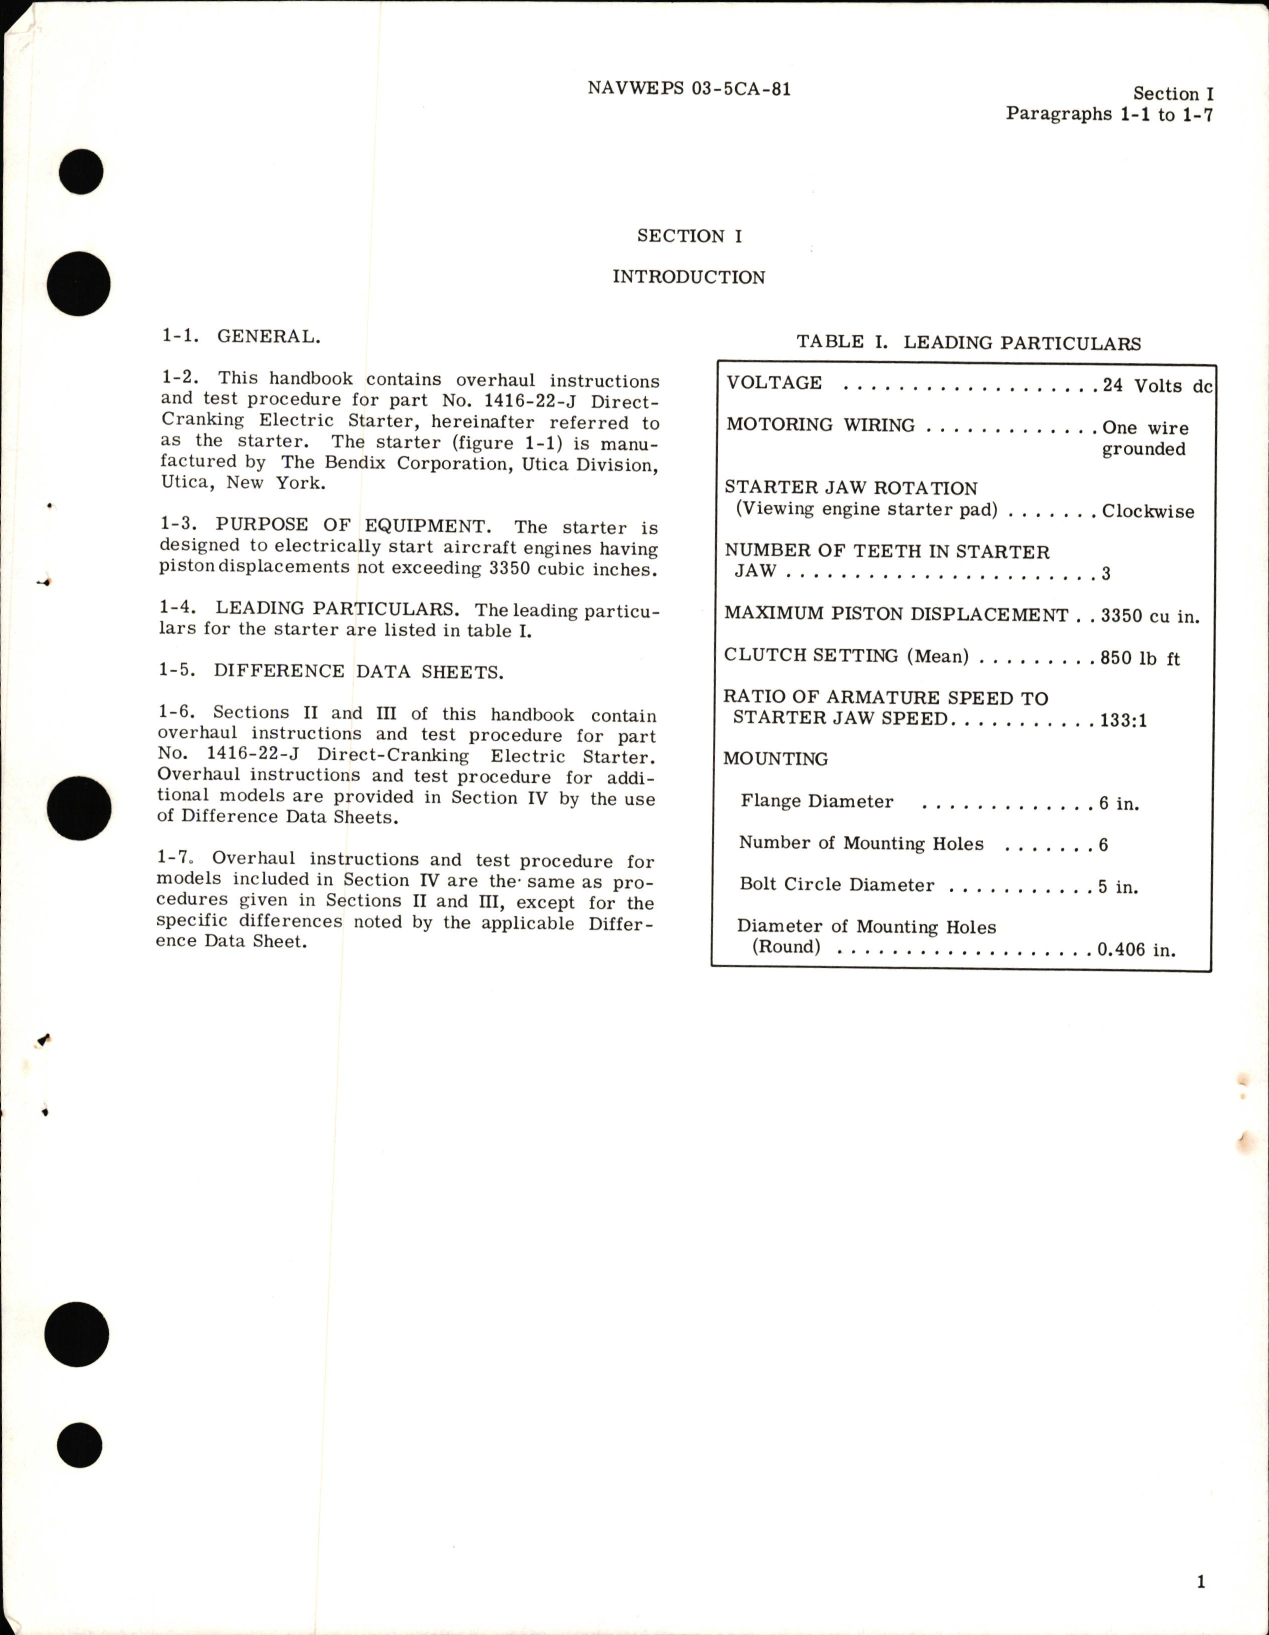 Sample page 7 from AirCorps Library document: Overhaul Instructions for Direct Cranking Electric Starter Part 1416 Series 